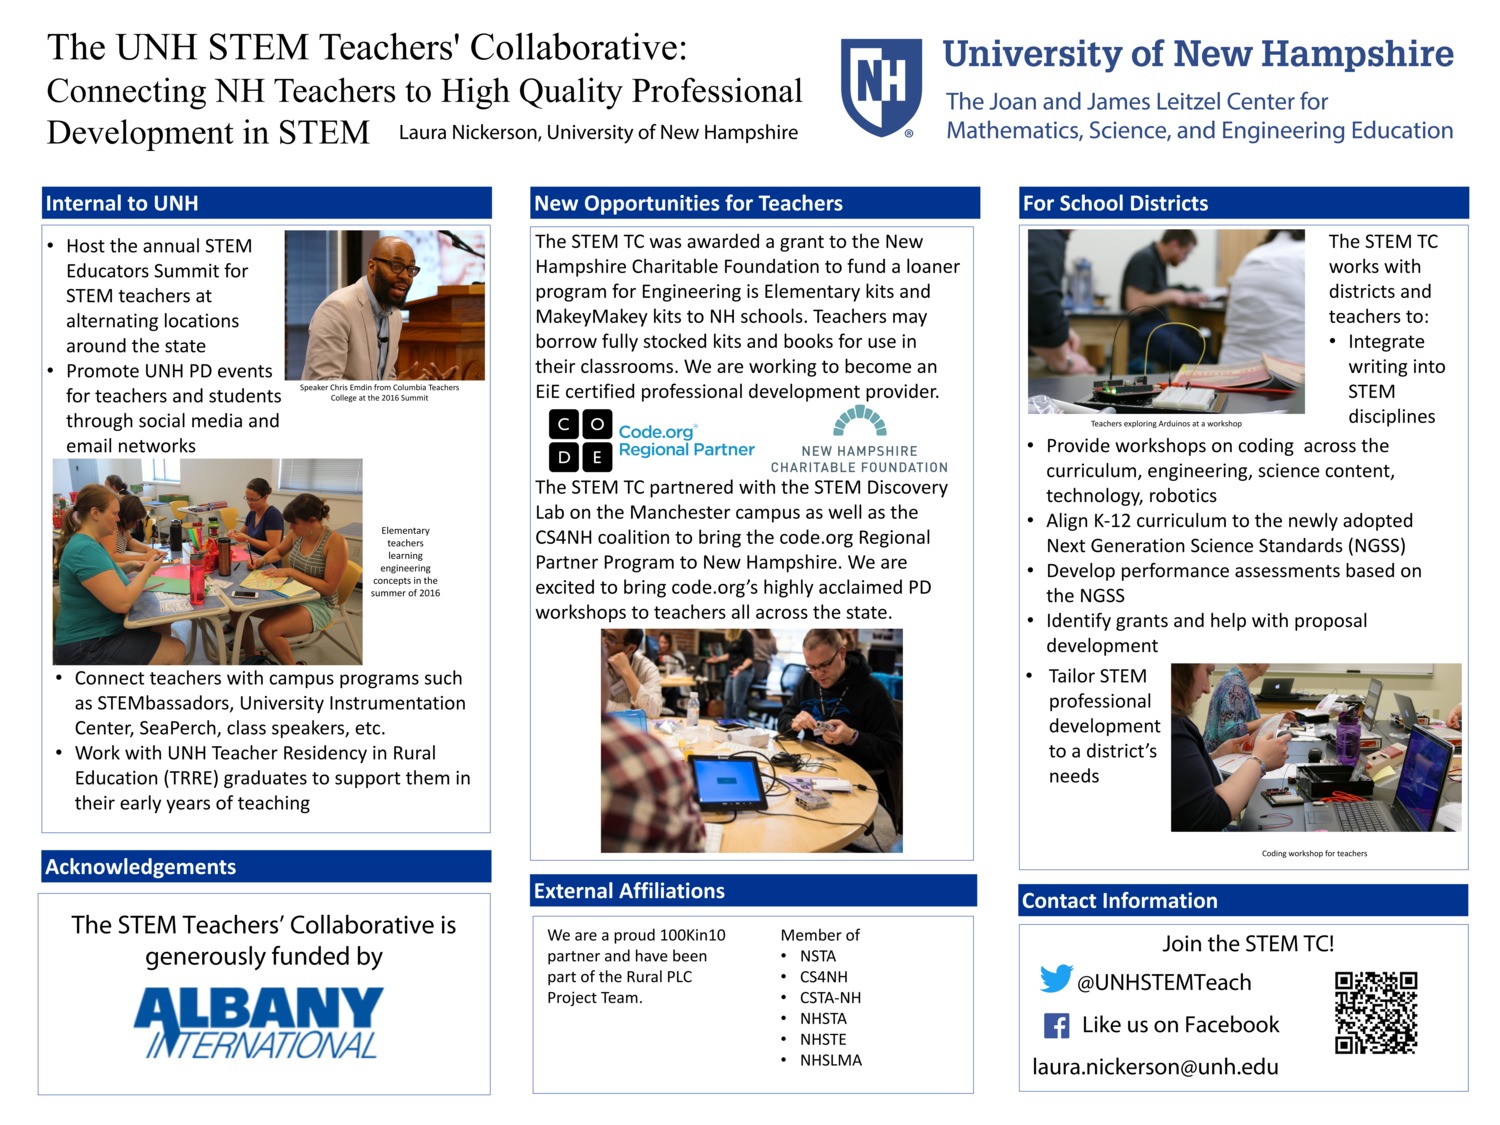 Stem Tc Poster For Ne-Aste by lnickerson